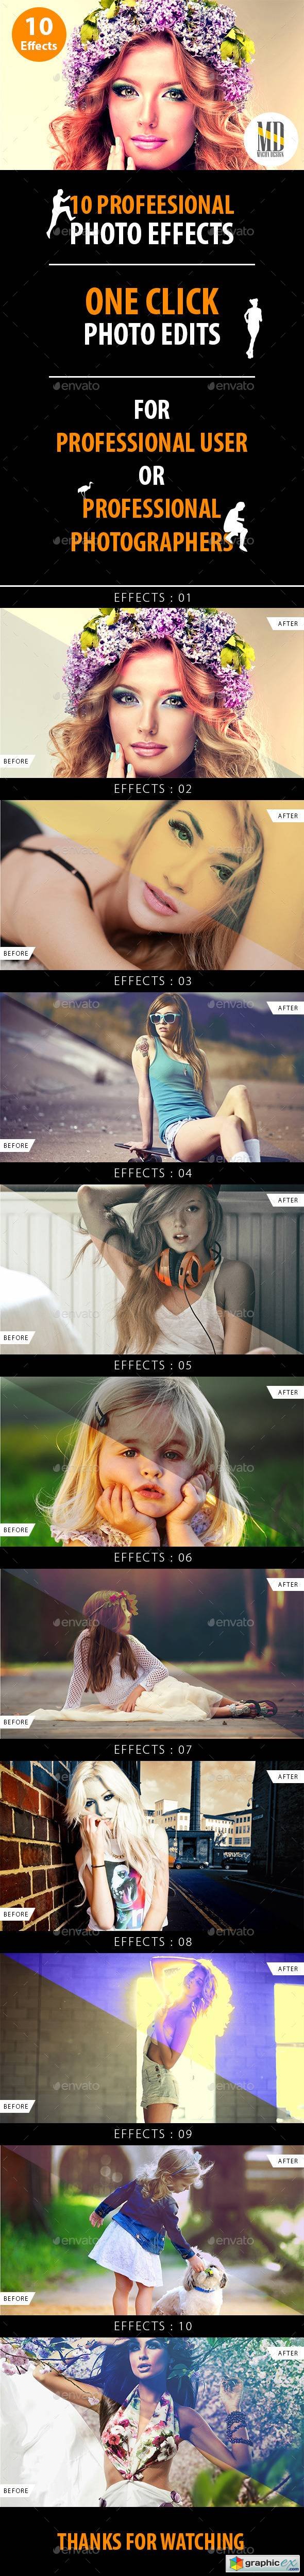 10 Professional Photo Effects